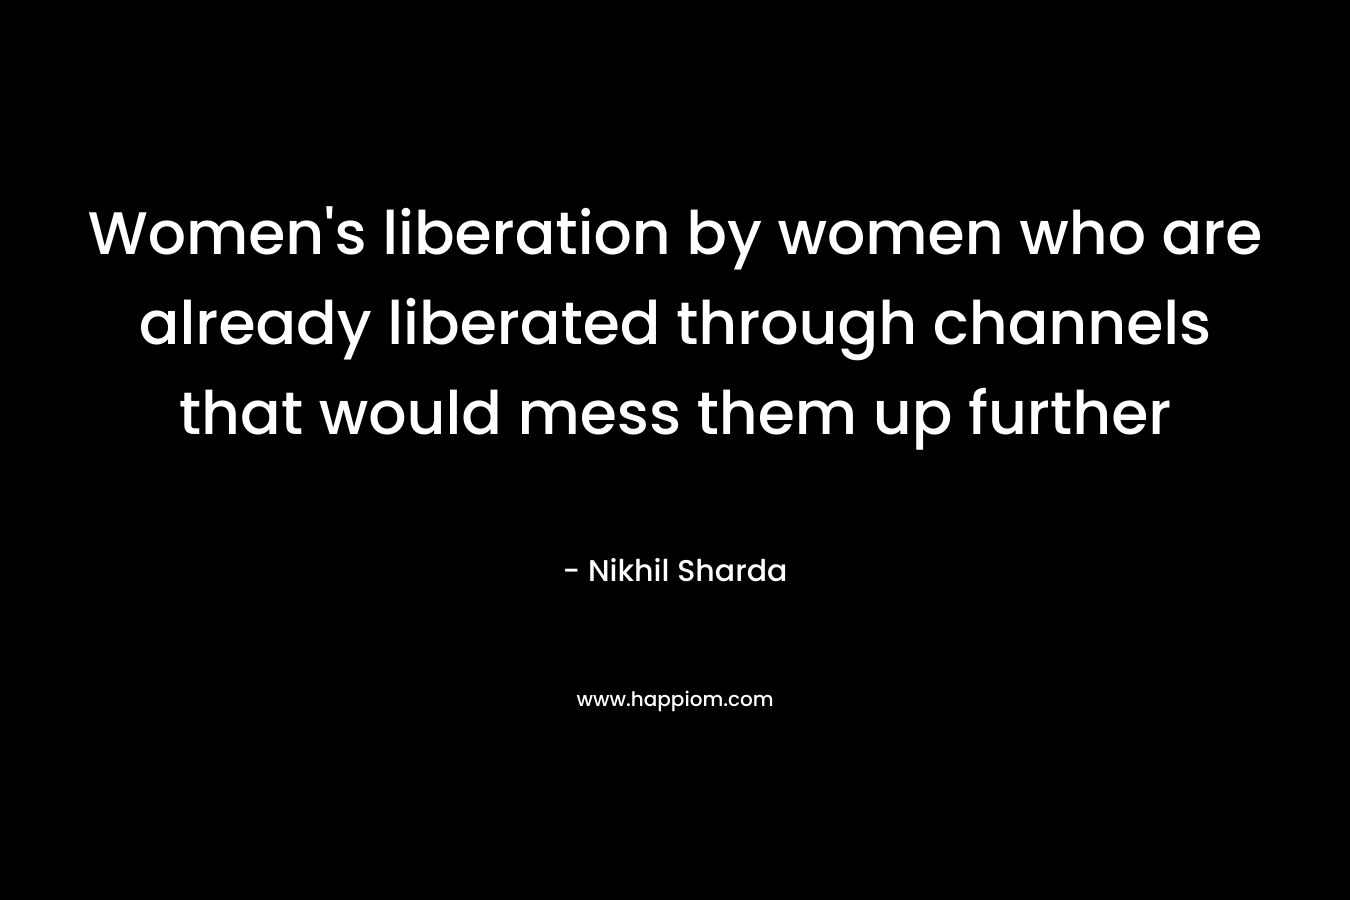 Women’s liberation by women who are already liberated through channels that would mess them up further – Nikhil Sharda